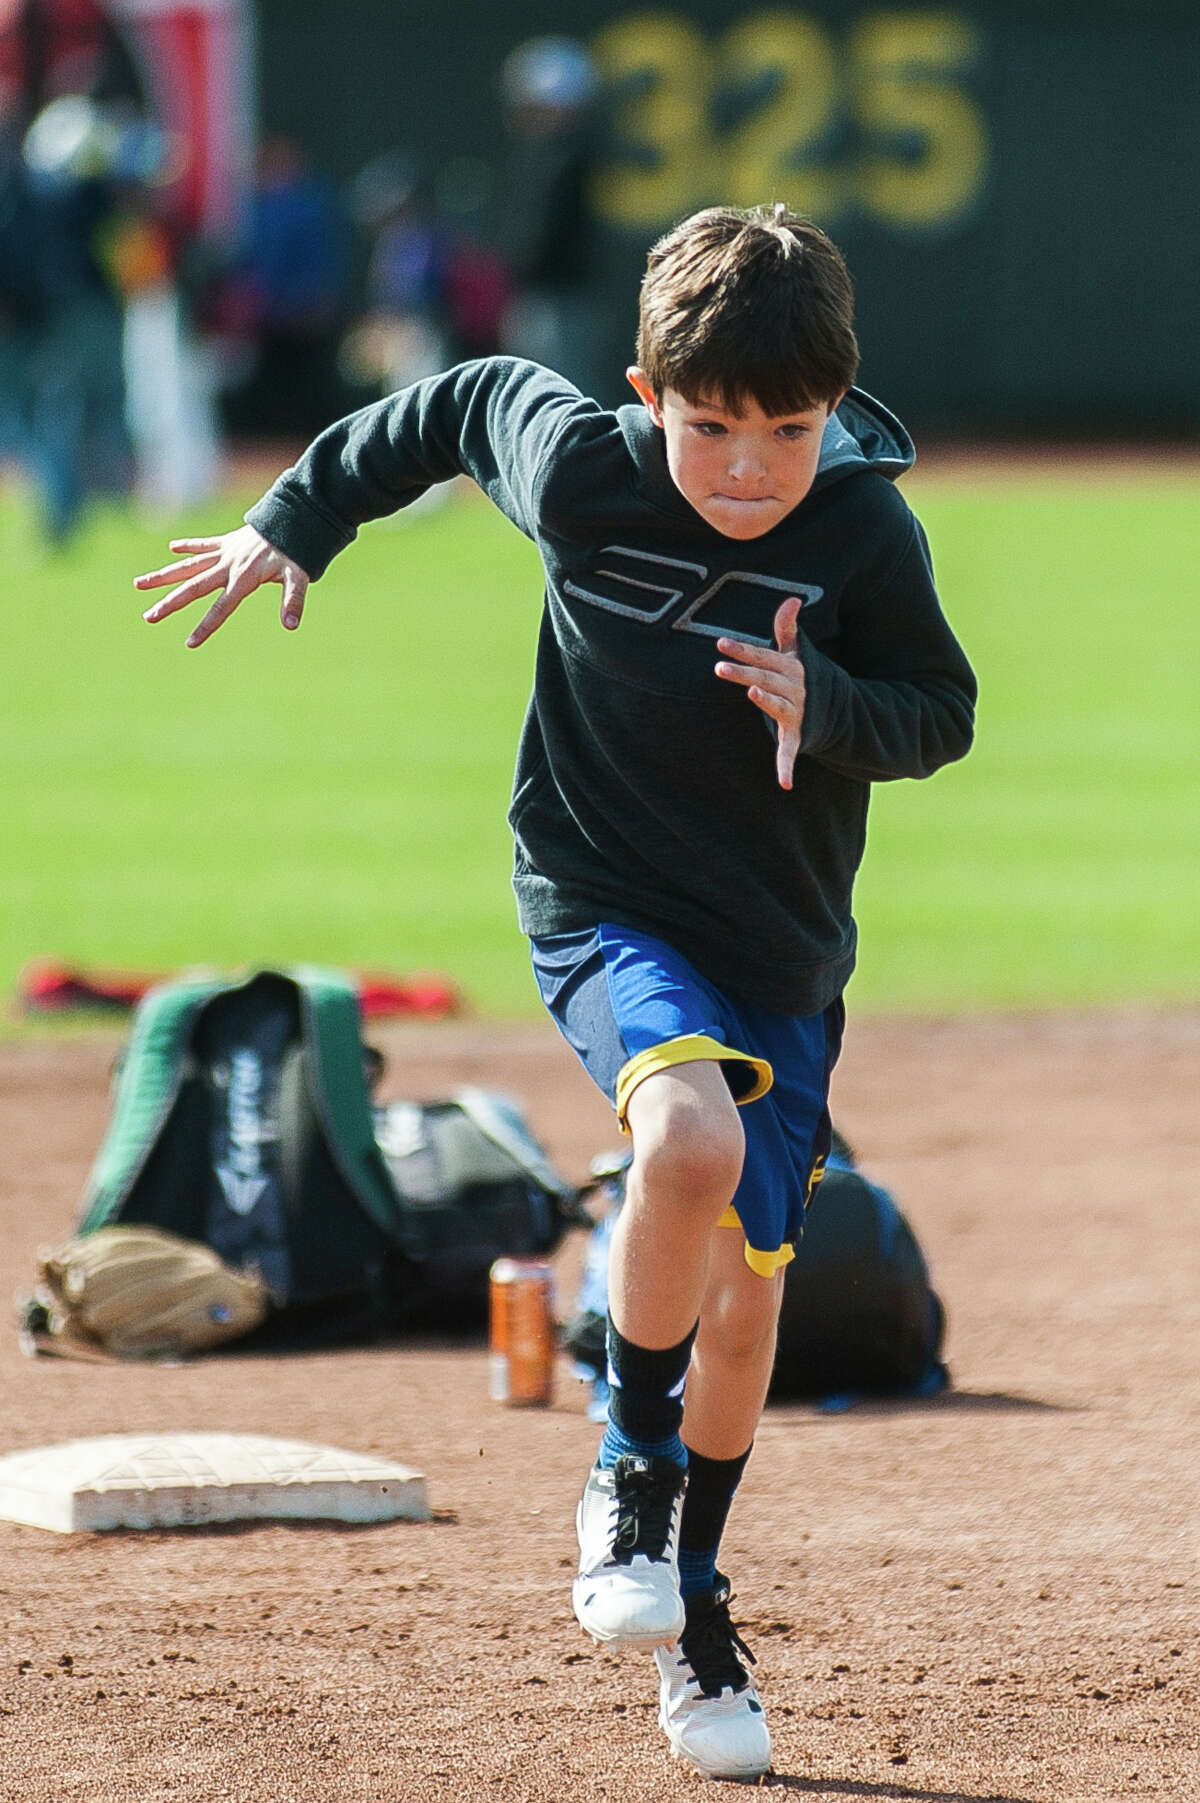 Kids get practice with baseball skills during the annual Pitch, Hit and Run event on Saturday, May 4, 2019 at Dow Diamond. (Katy Kildee/kkildee@mdn.net)